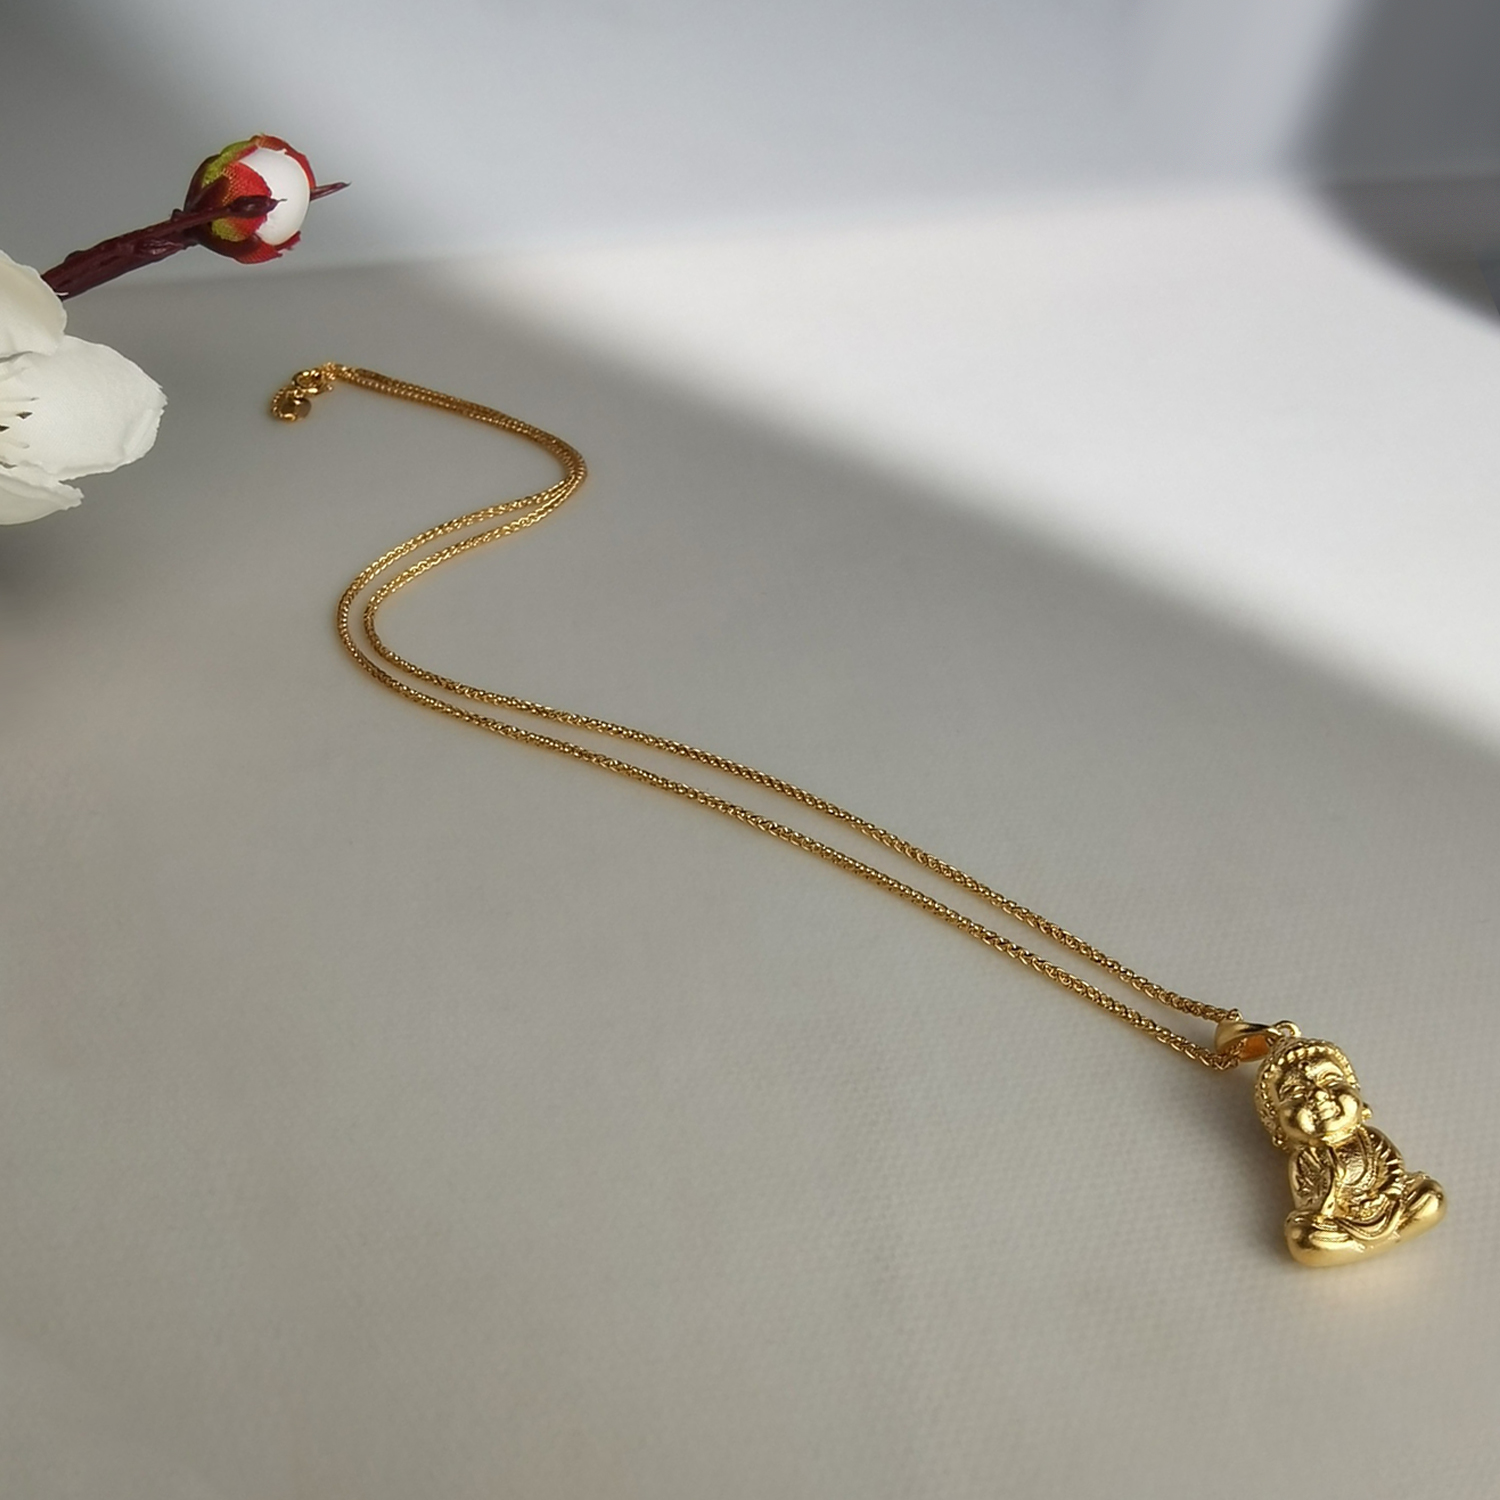 Alluvial Gold Ancient Method Vacuum Electroplating 24K Gold Buddha Boy Necklace